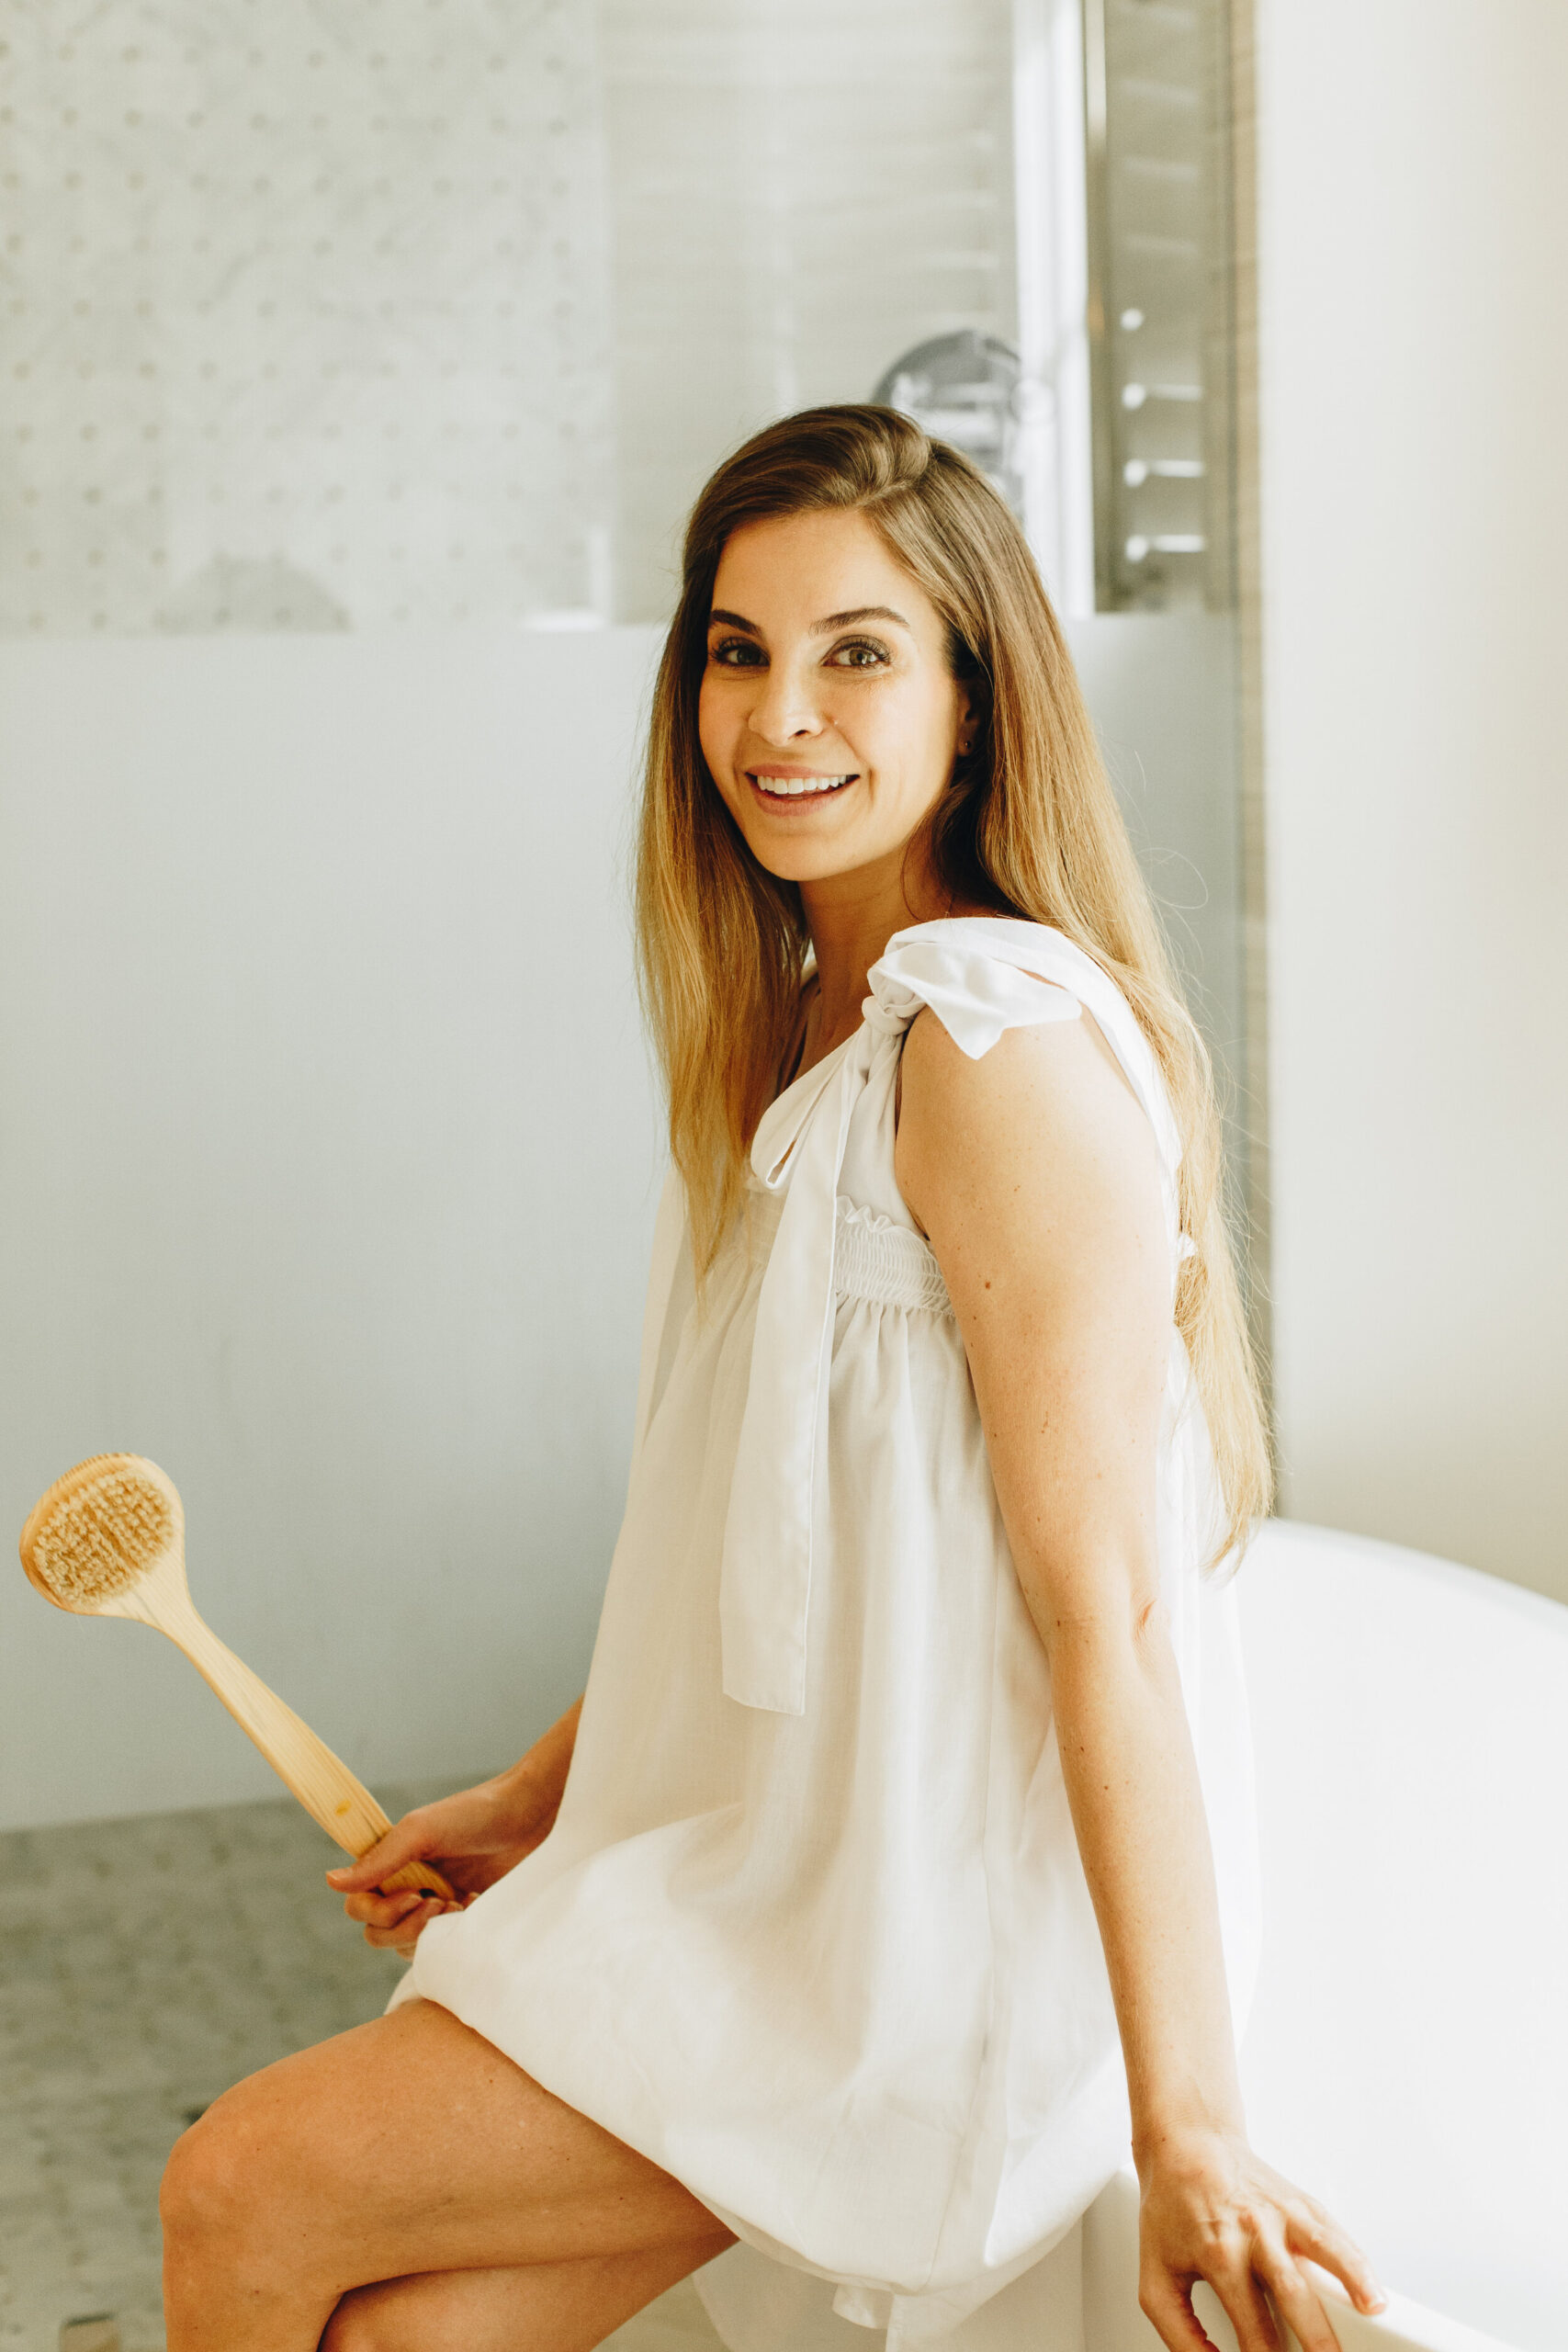 What is Dry Brushing Good For? Quick Tips on How to Dry Brush, and Why It Works